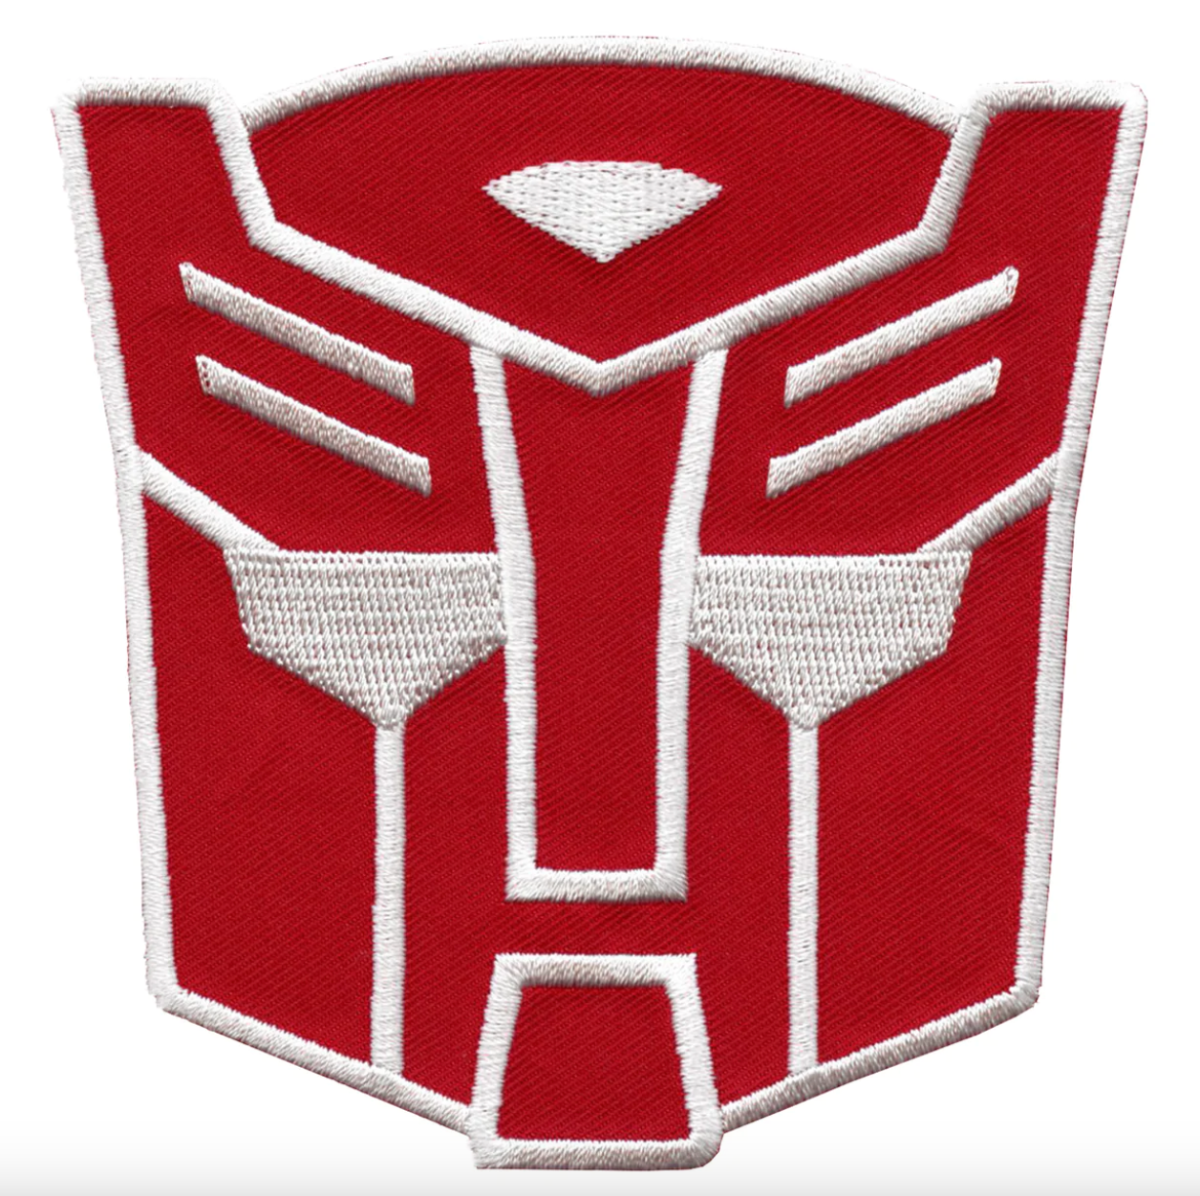 Transformers Autobot Hook Patch